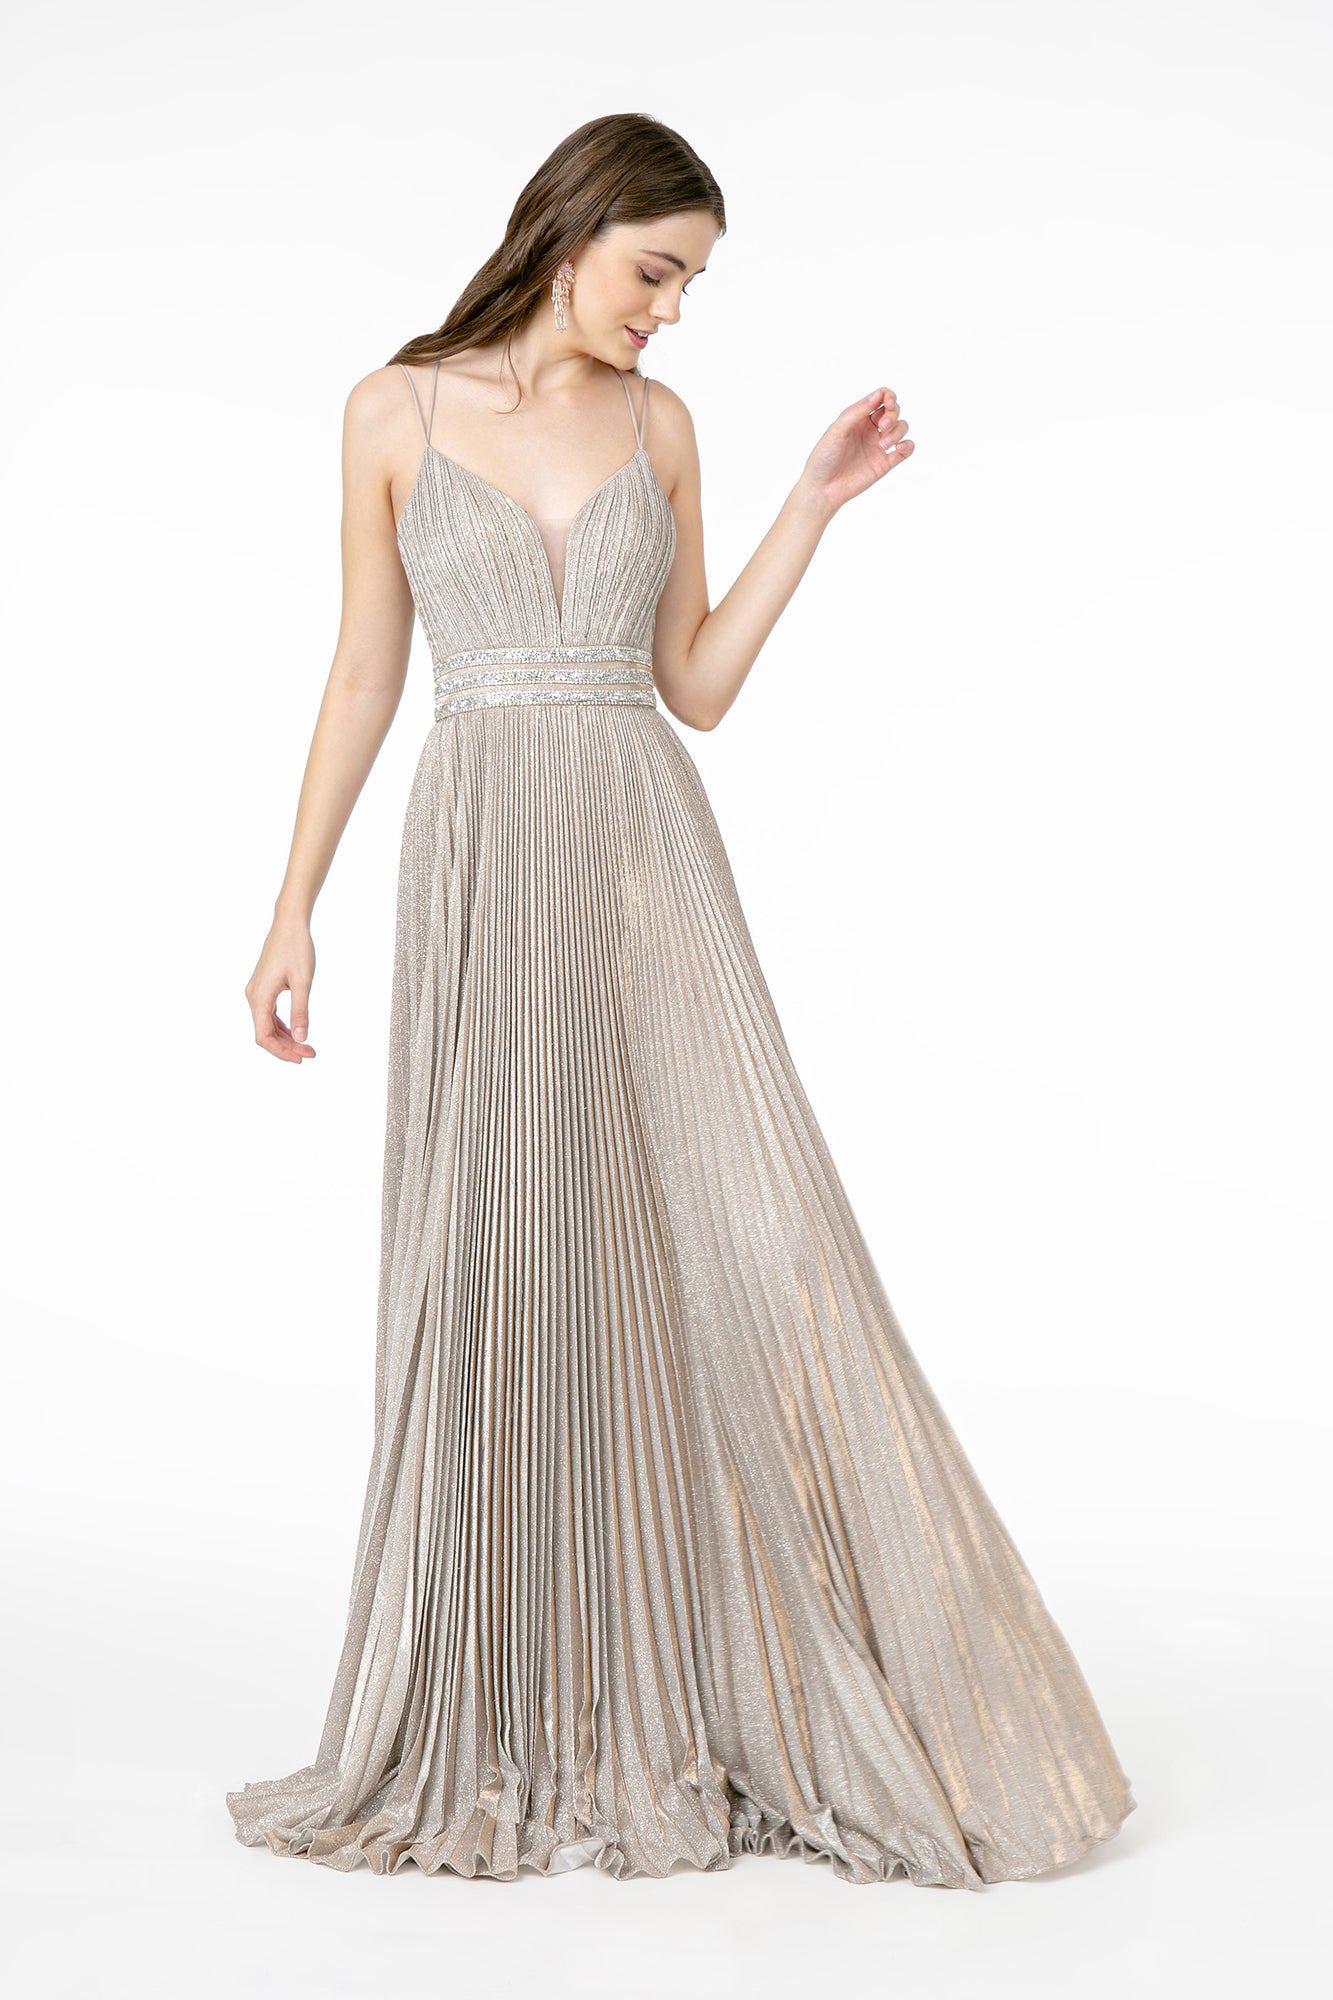 Illusion Deep V-Neck A-Line Pleated Long Dress with Metallic Glitter Finish-smcdress